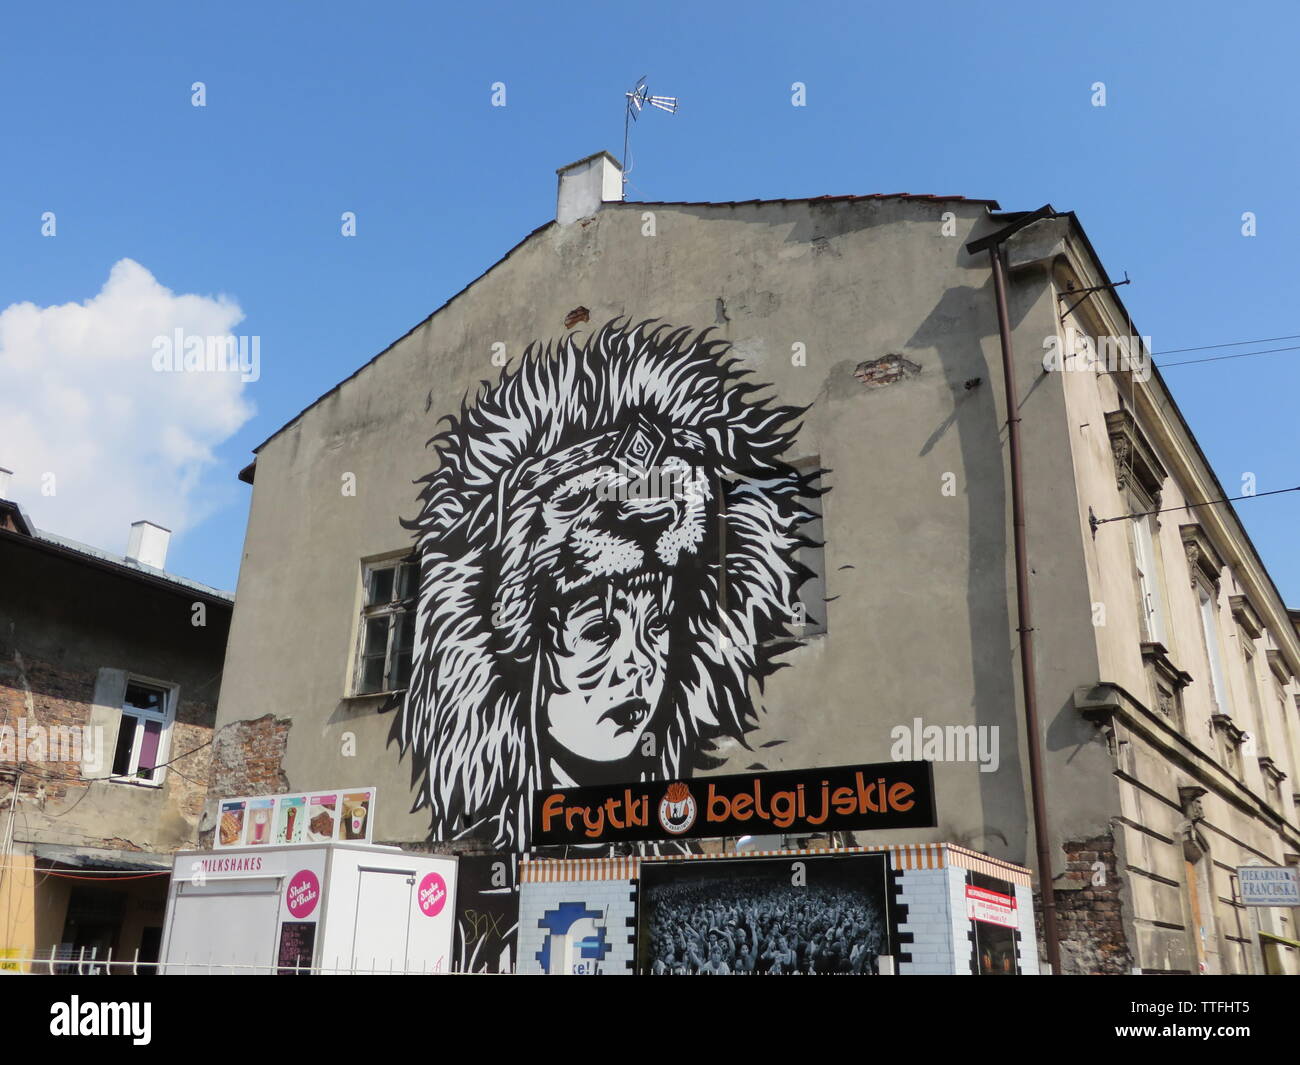 Judah large mural by Pil Peled in Cracow, Poland Stock Photo